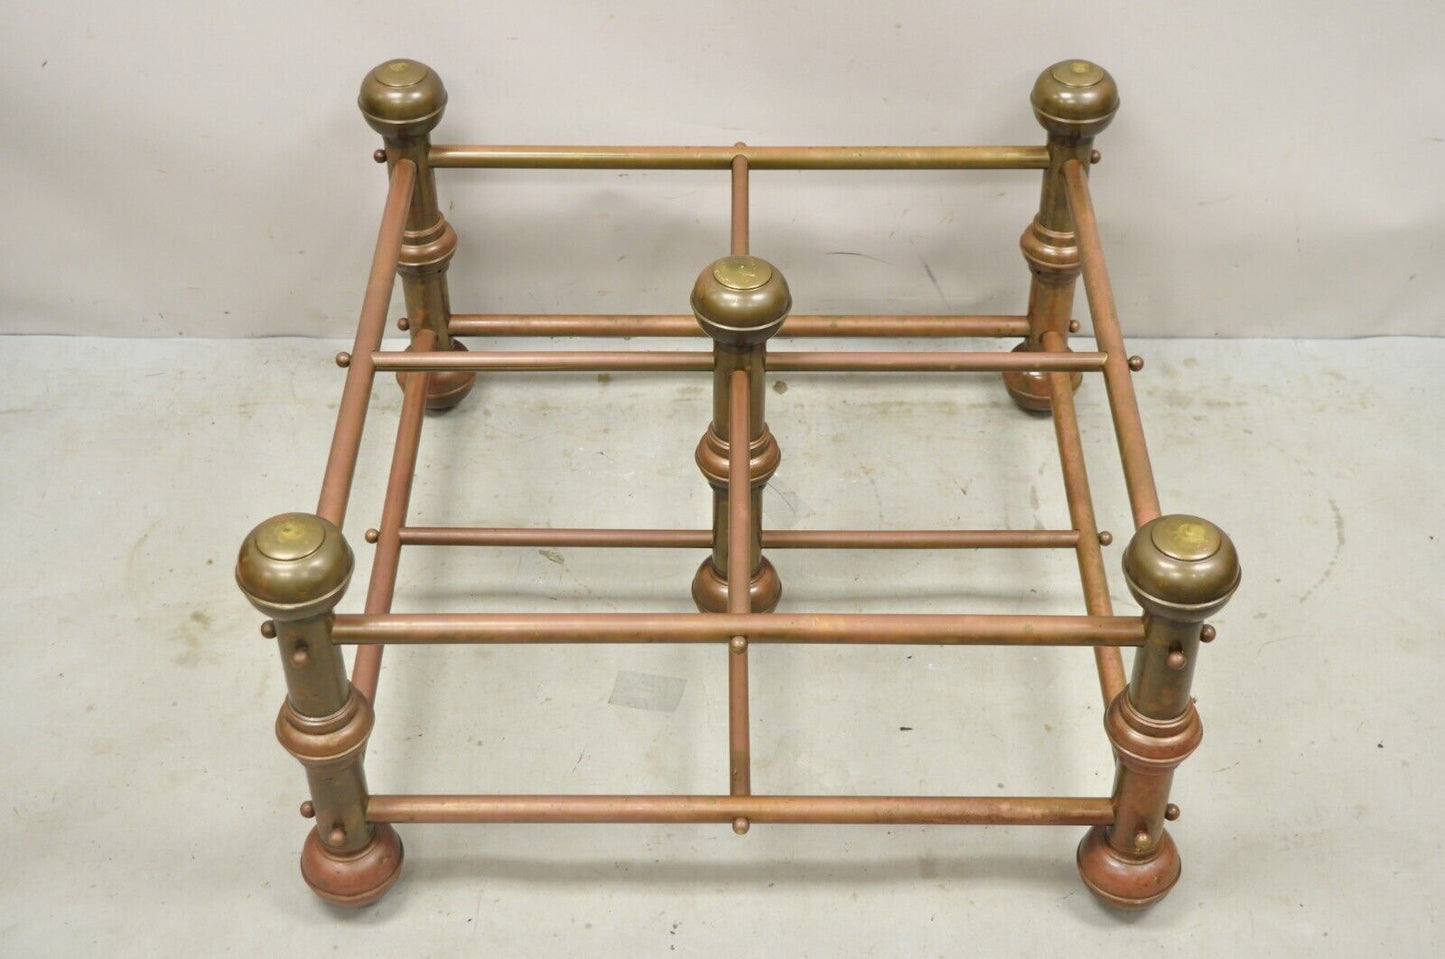 Antique Victorian Turned Brass Bed Style Pipe Post Square Coffee Table Base